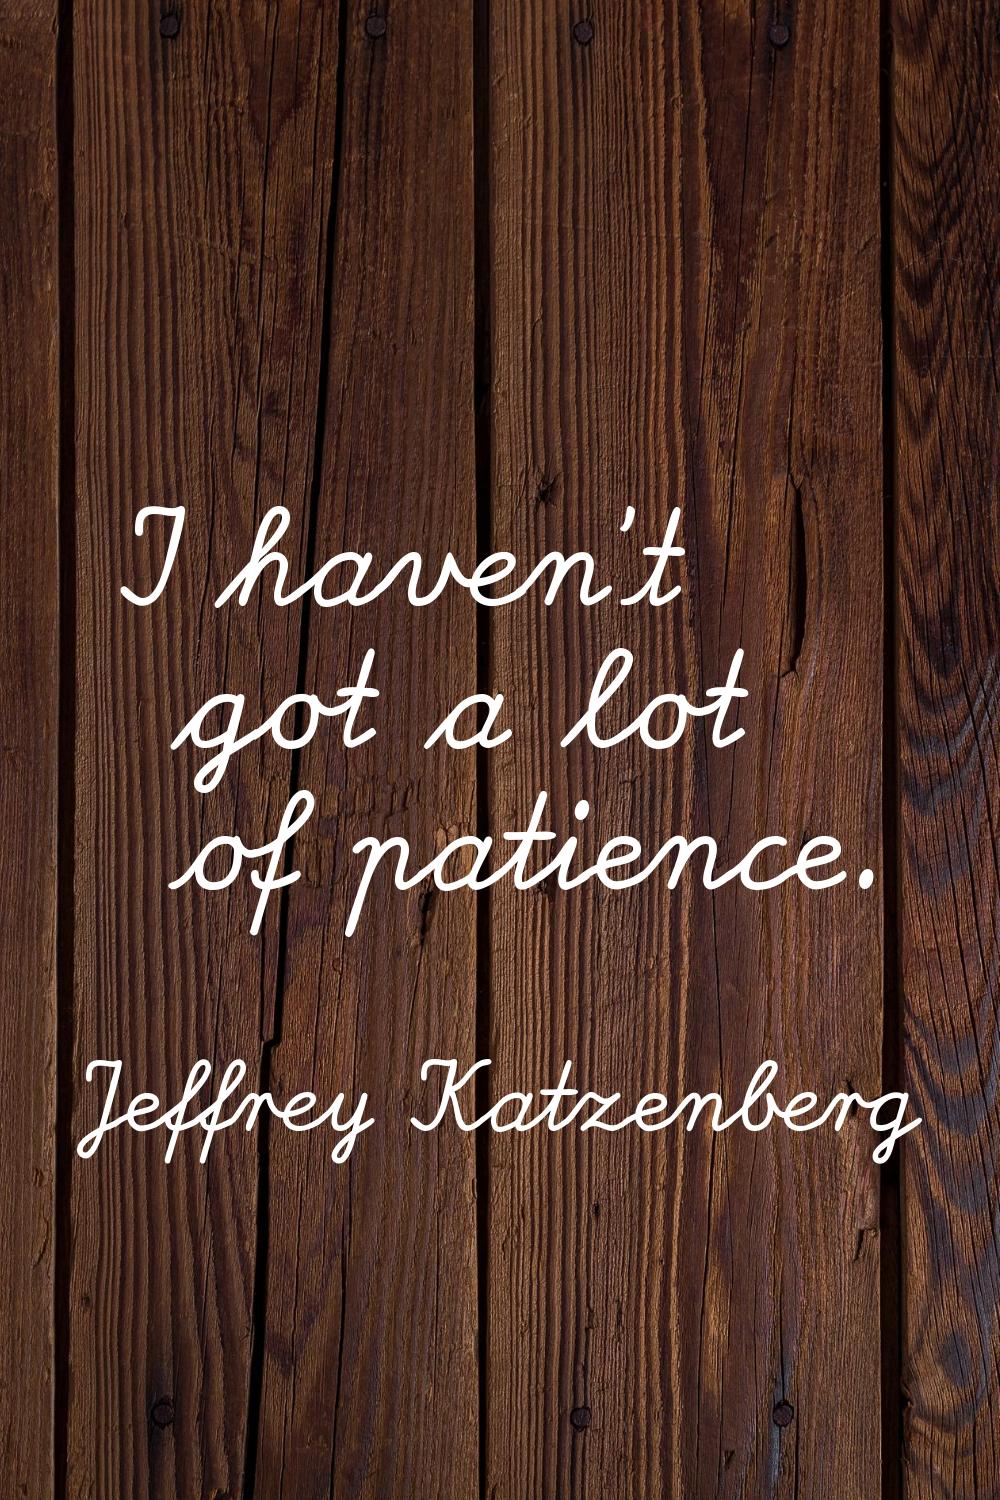 I haven't got a lot of patience.